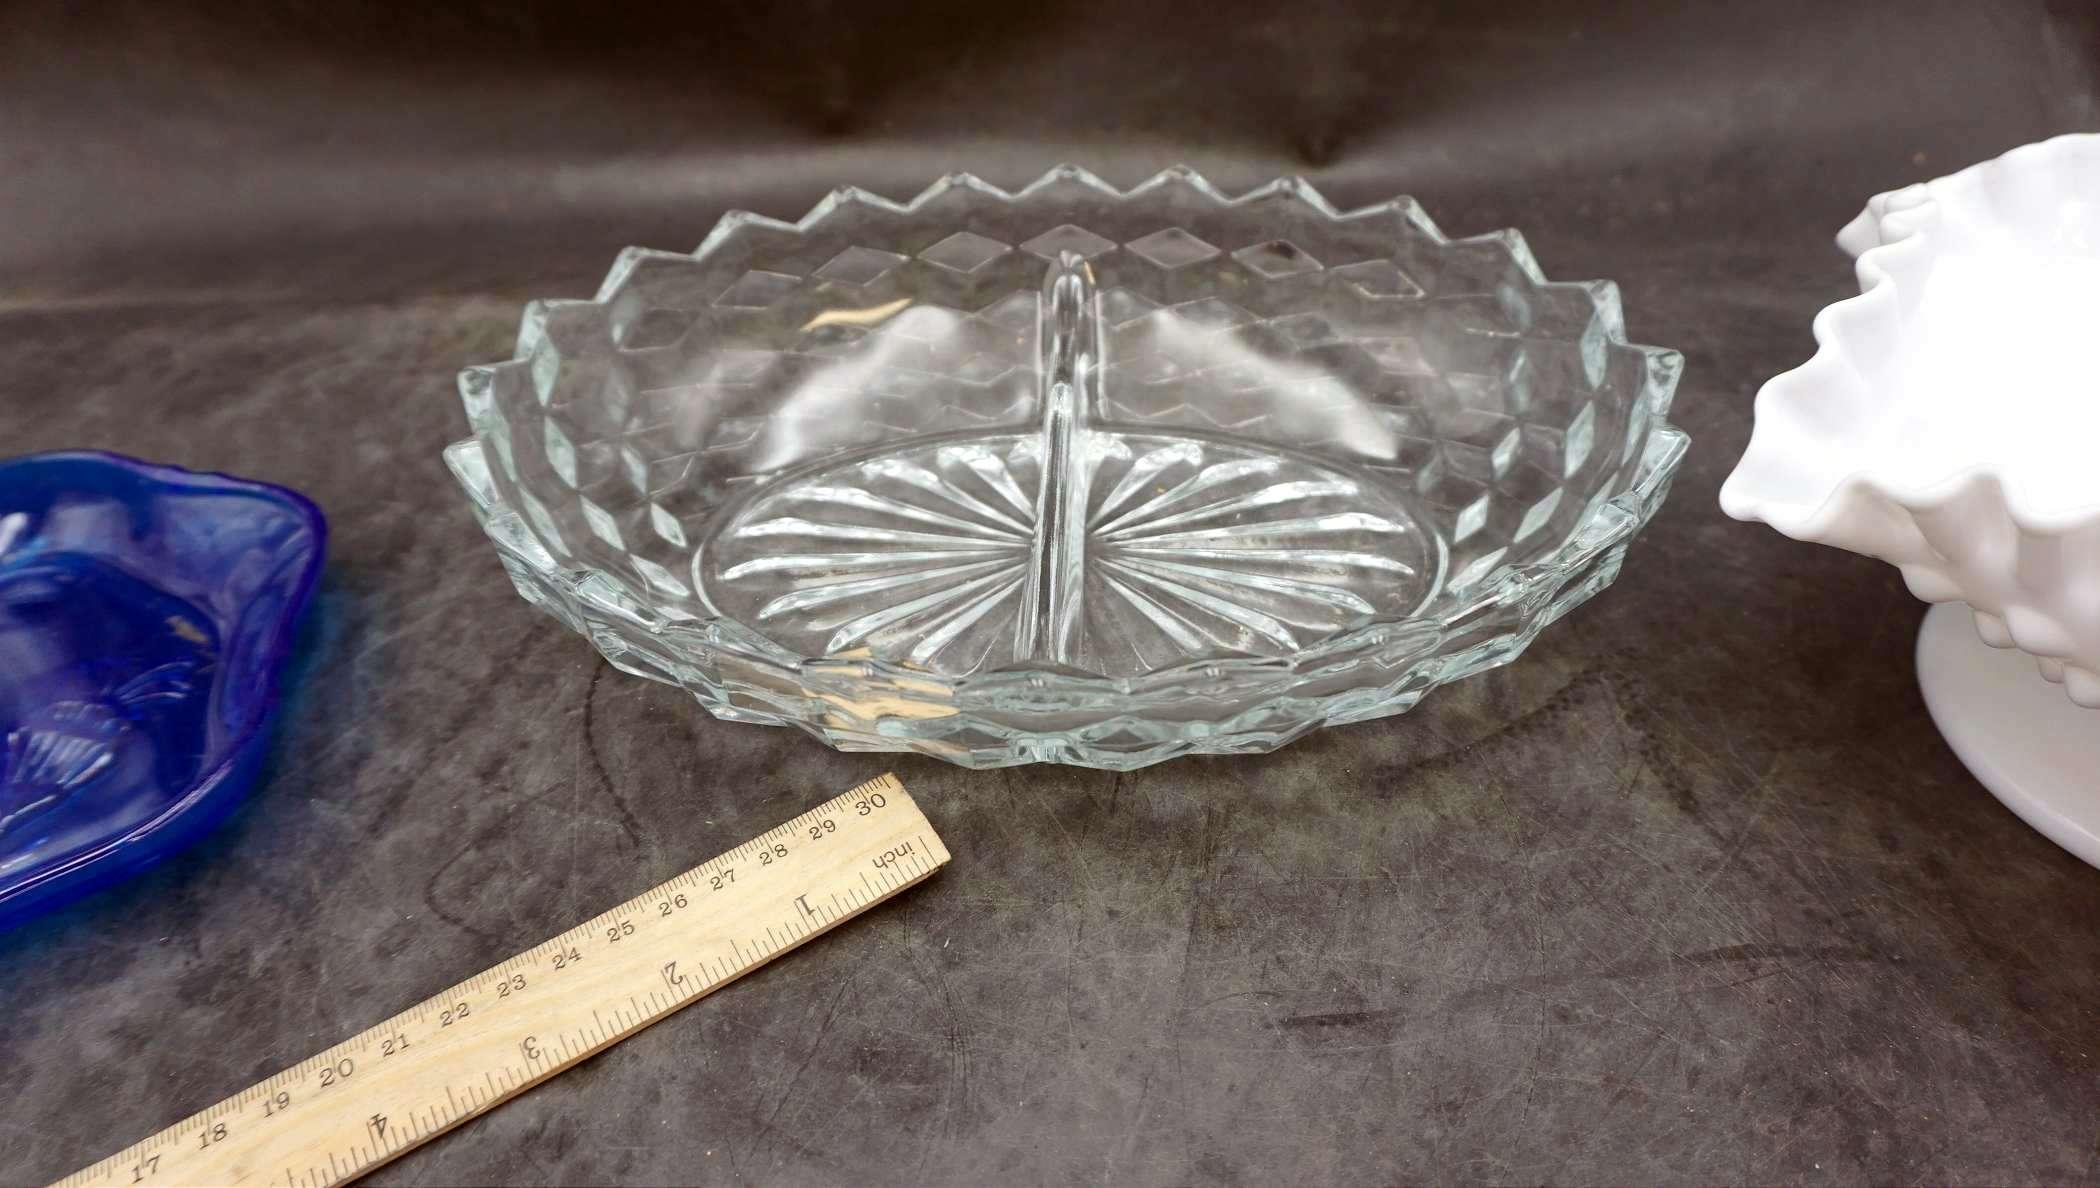 Blue Flower Tray (Chipping), Divided Glass Dish & White Hobnail Ruffle Bowl